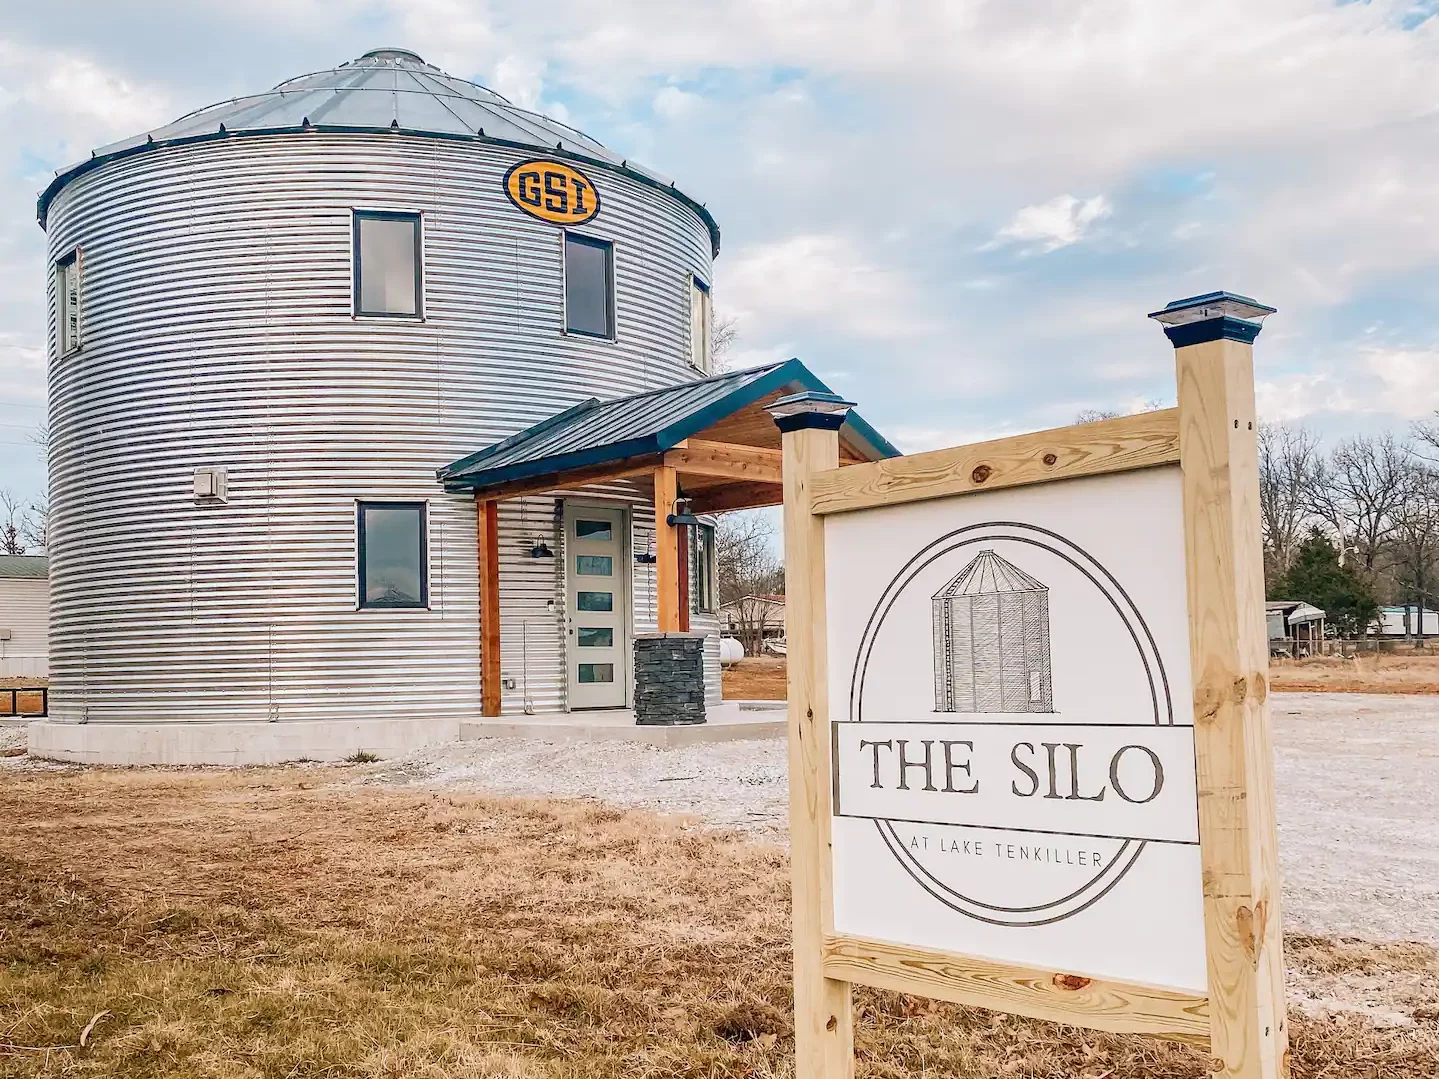 The silo provided a unique and enjoyable place to stay.